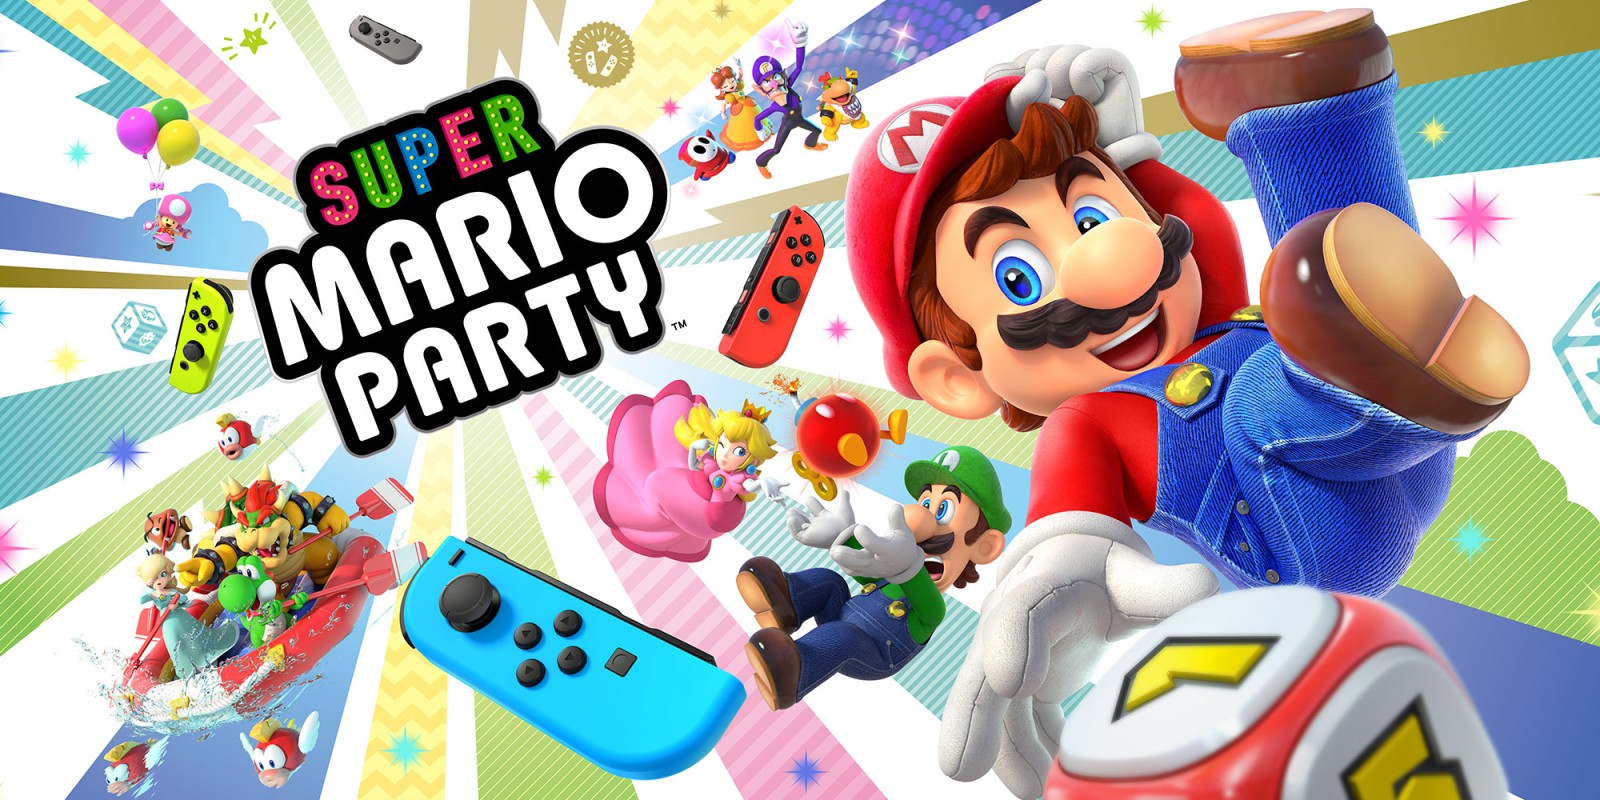 H2x1 NSwitch SuperMarioParty image1600w.jpg